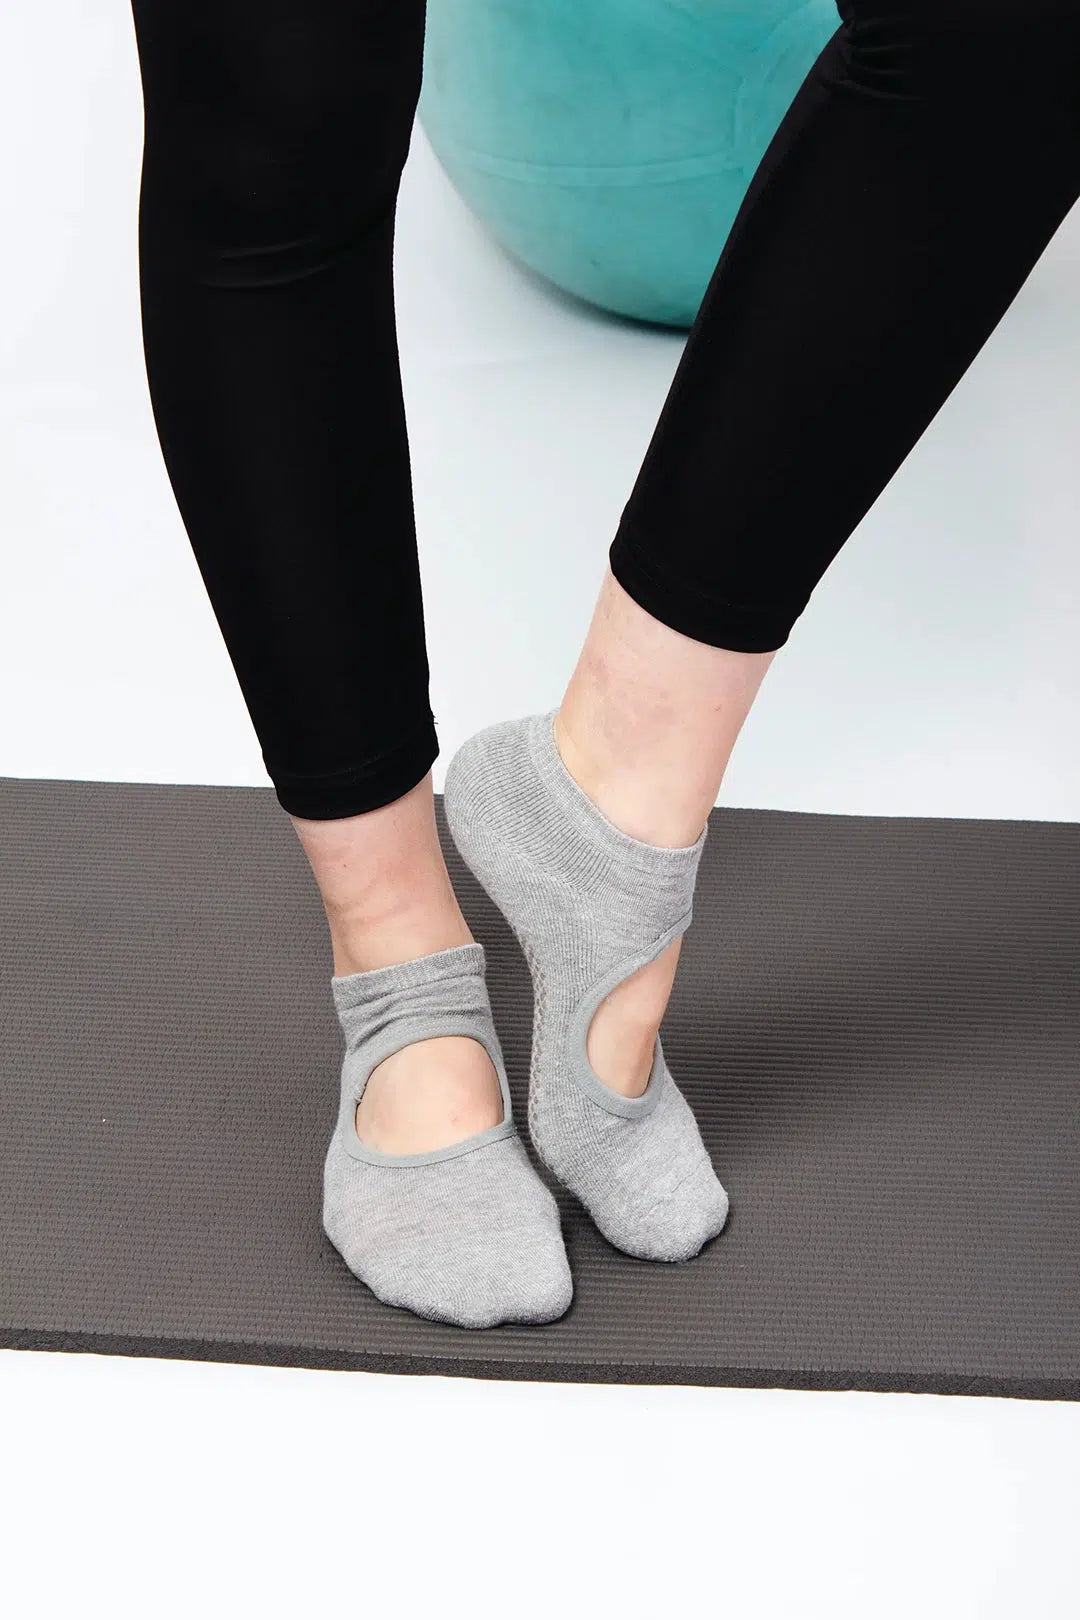 Prime Reasons Why You Should Invest in Yoga Toeless Grip Socks